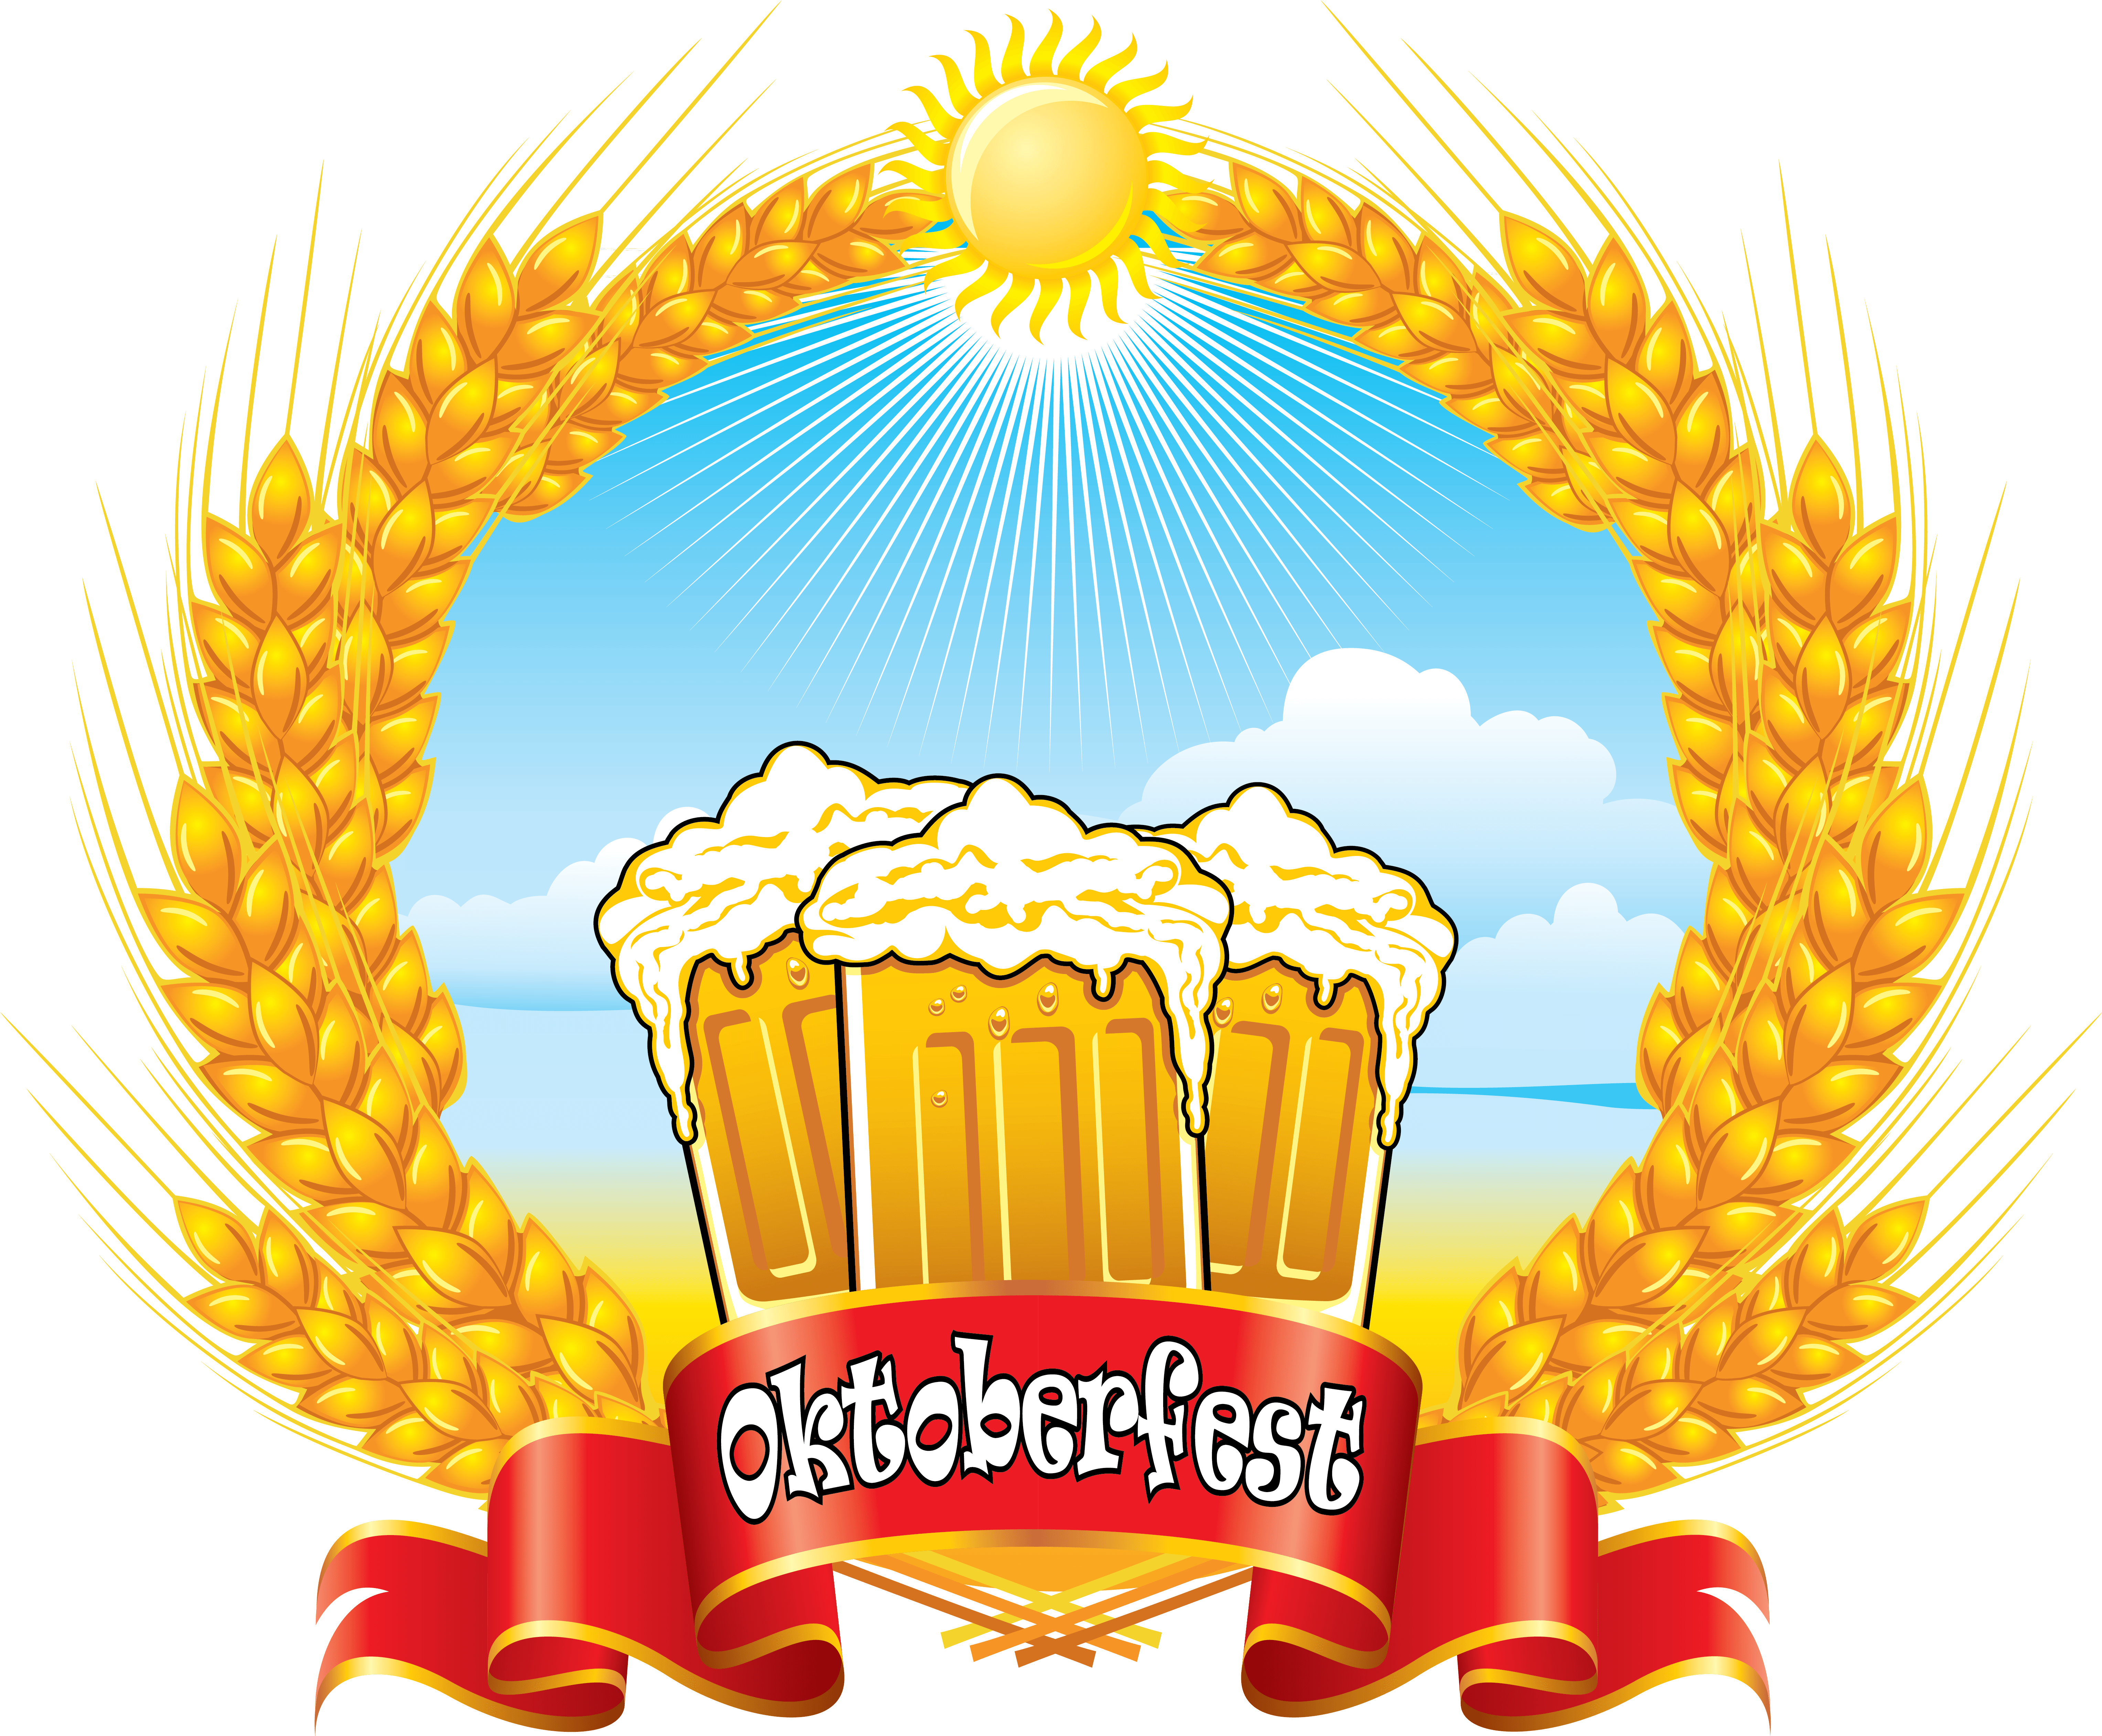 A Logo Of A Beer Festival